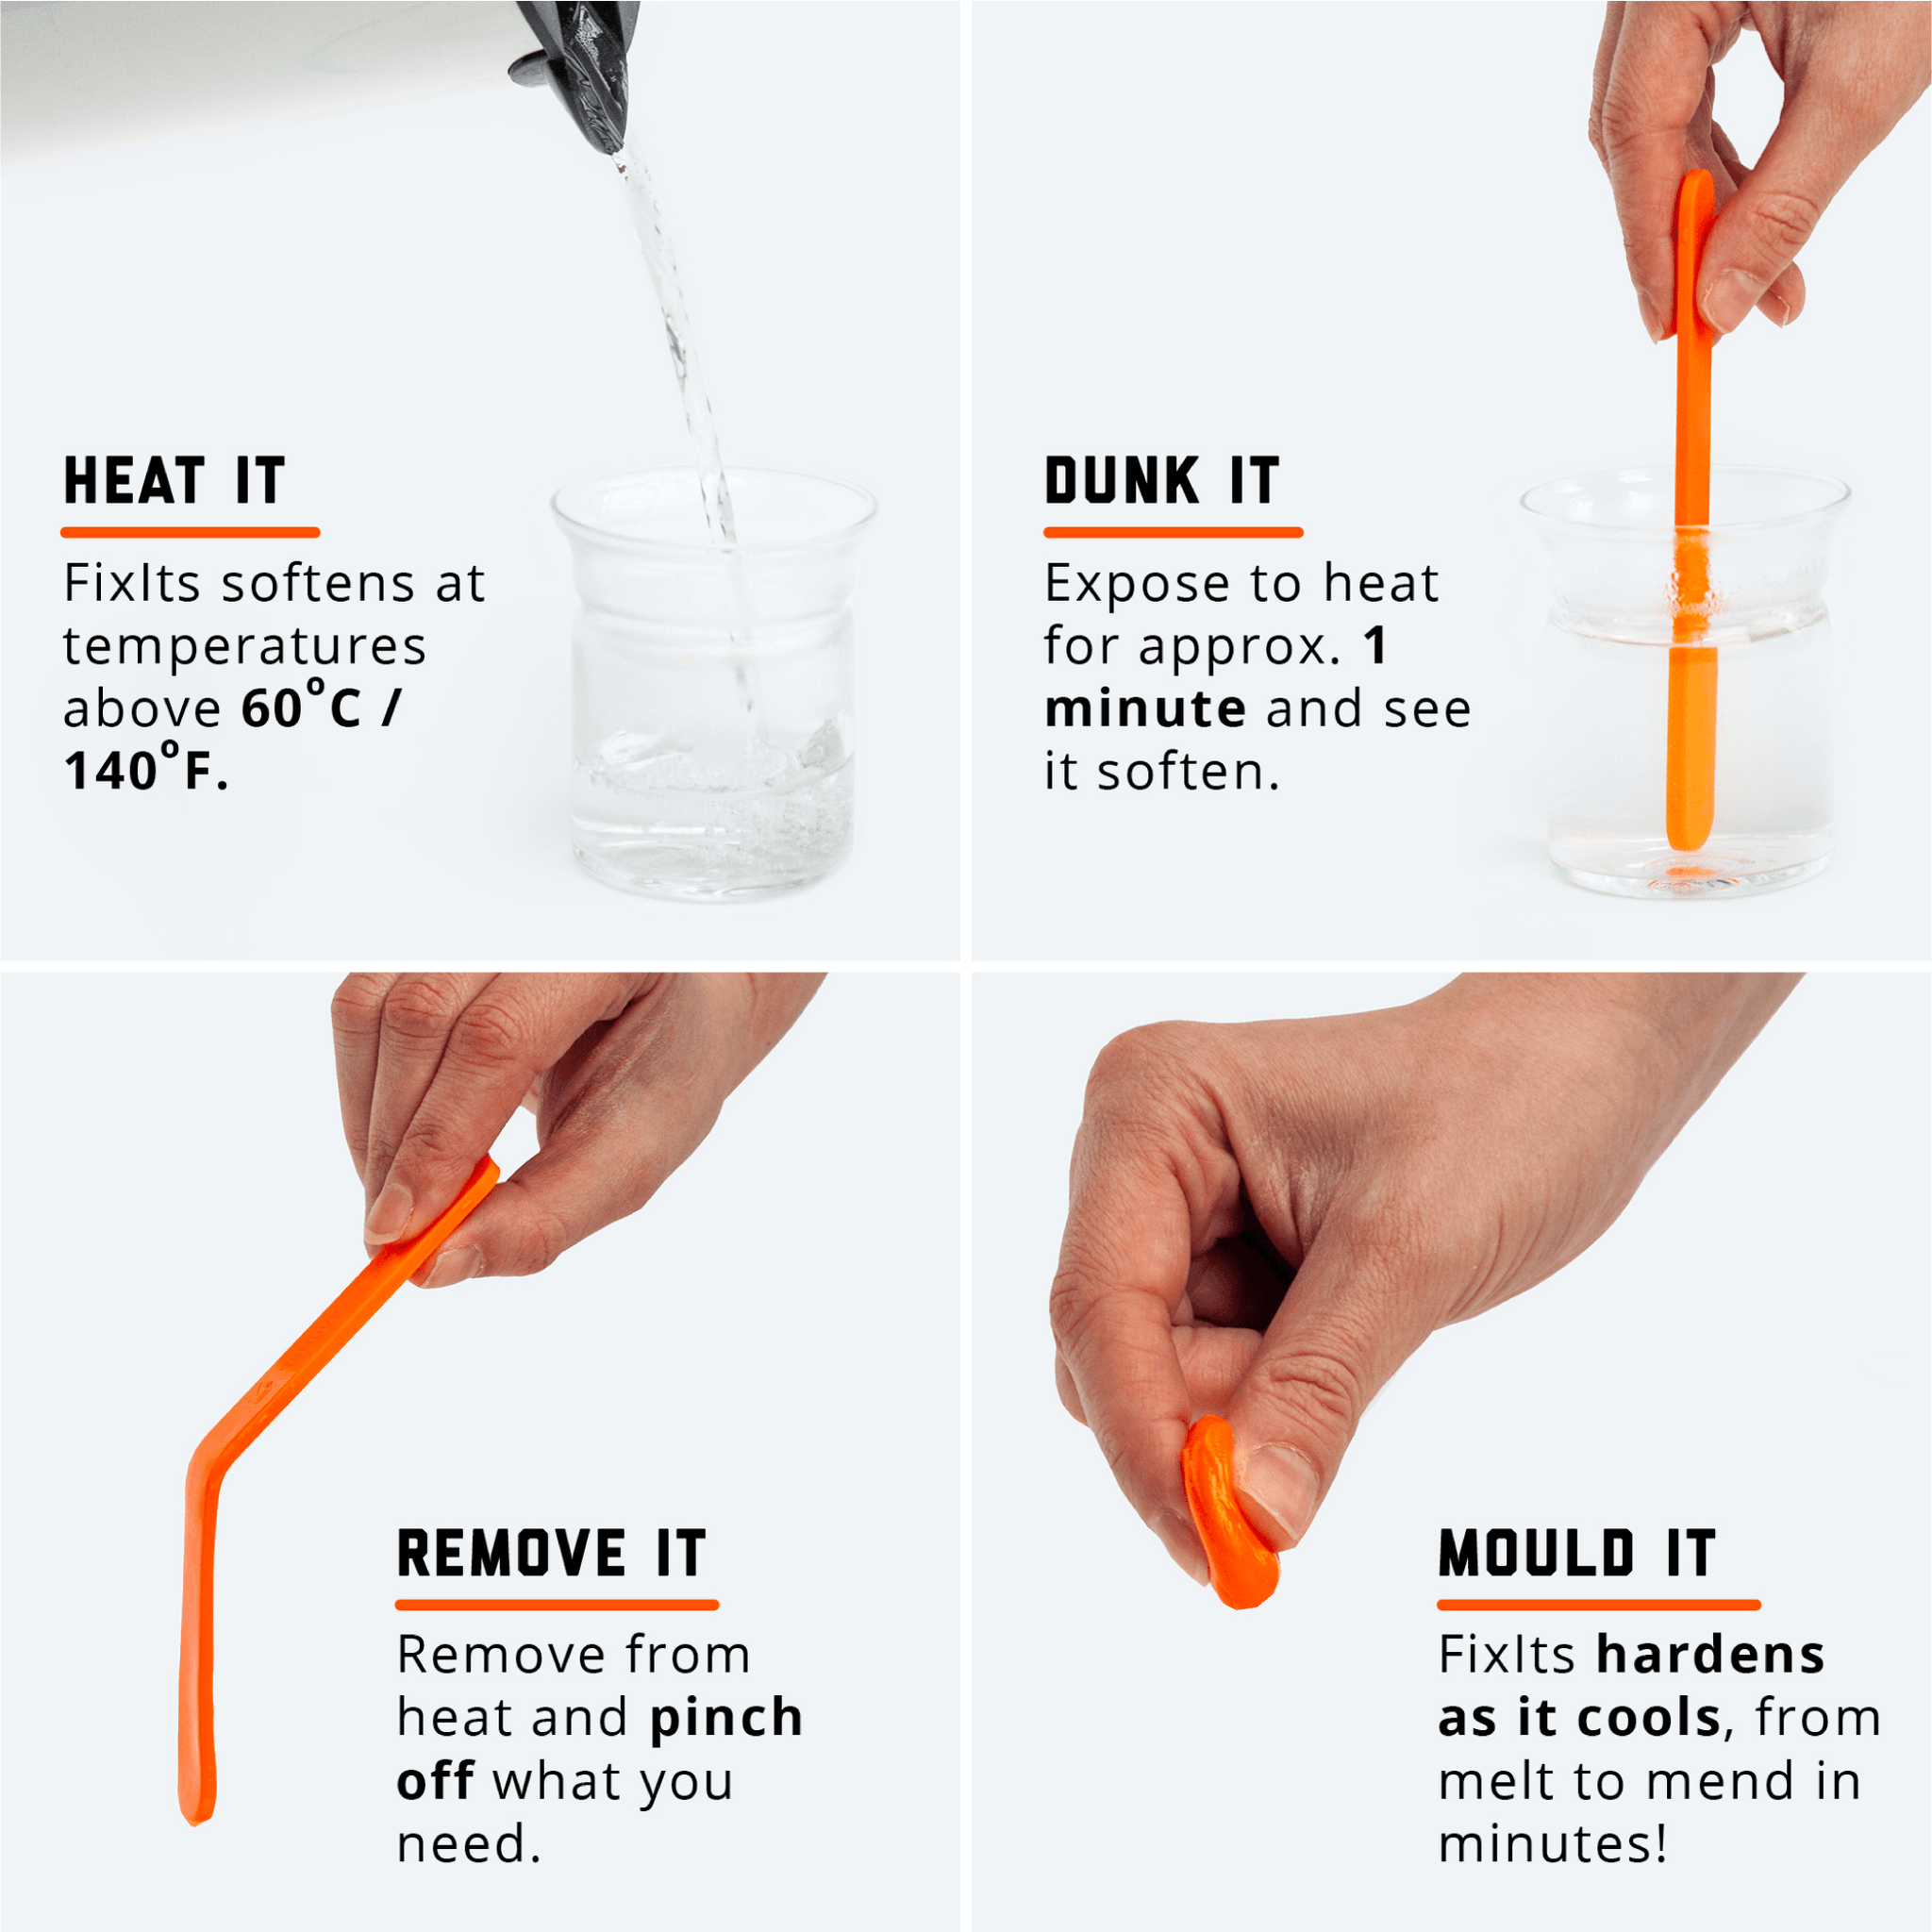 FixIts instructions: heat water to 60 degrees, then dunk your FixIts into it for approximately one minute, remove it and mould it into the desired shape. It will harden as it cools.